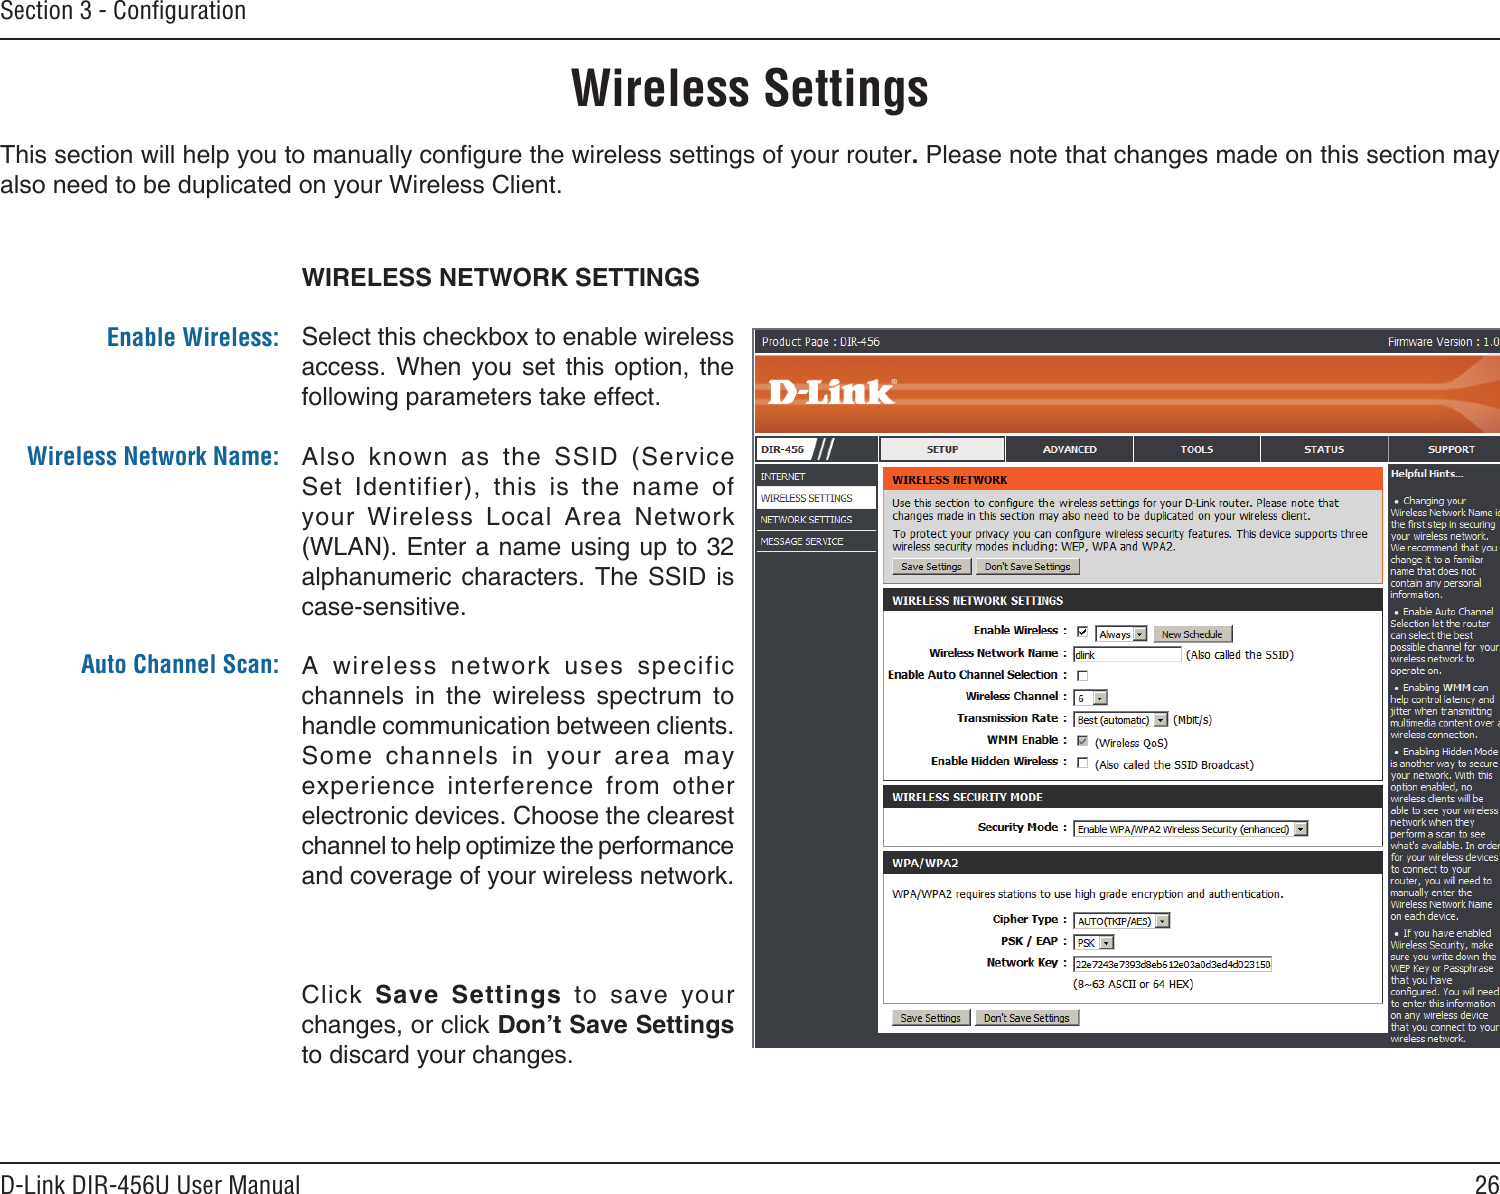 26D-Link DIR-456U User ManualSection 3 - ConﬁgurationWIRELESS NETWORK SETTINGSSelect this checkbox to enable wireless access.  When  you  set  this  option,  the following parameters take effect.Also  known  as  the  SSID  (Service Set  Identifier),  this  is  the  name  of your  Wireless  Local  Area  Network (WLAN). Enter a name using up to 32 alphanumeric characters.  The SSID  is case-sensitive.A  wireless  network  uses  specific channels  in  the  wireless  spectrum  to  handle communication between clients. Some  channels  in  your  area  may experience  interference  from  other electronic devices. Choose the clearest channel to help optimize the performance and coverage of your wireless network.Click  Save  Settings  to  save  your changes, or click Don’t Save Settings to discard your changes.Enable Wireless:Wireless Network Name:Auto Channel Scan:Wireless SettingsThis section will help you to manually congure the wireless settings of your router. Please note that changes made on this section may also need to be duplicated on your Wireless Client.